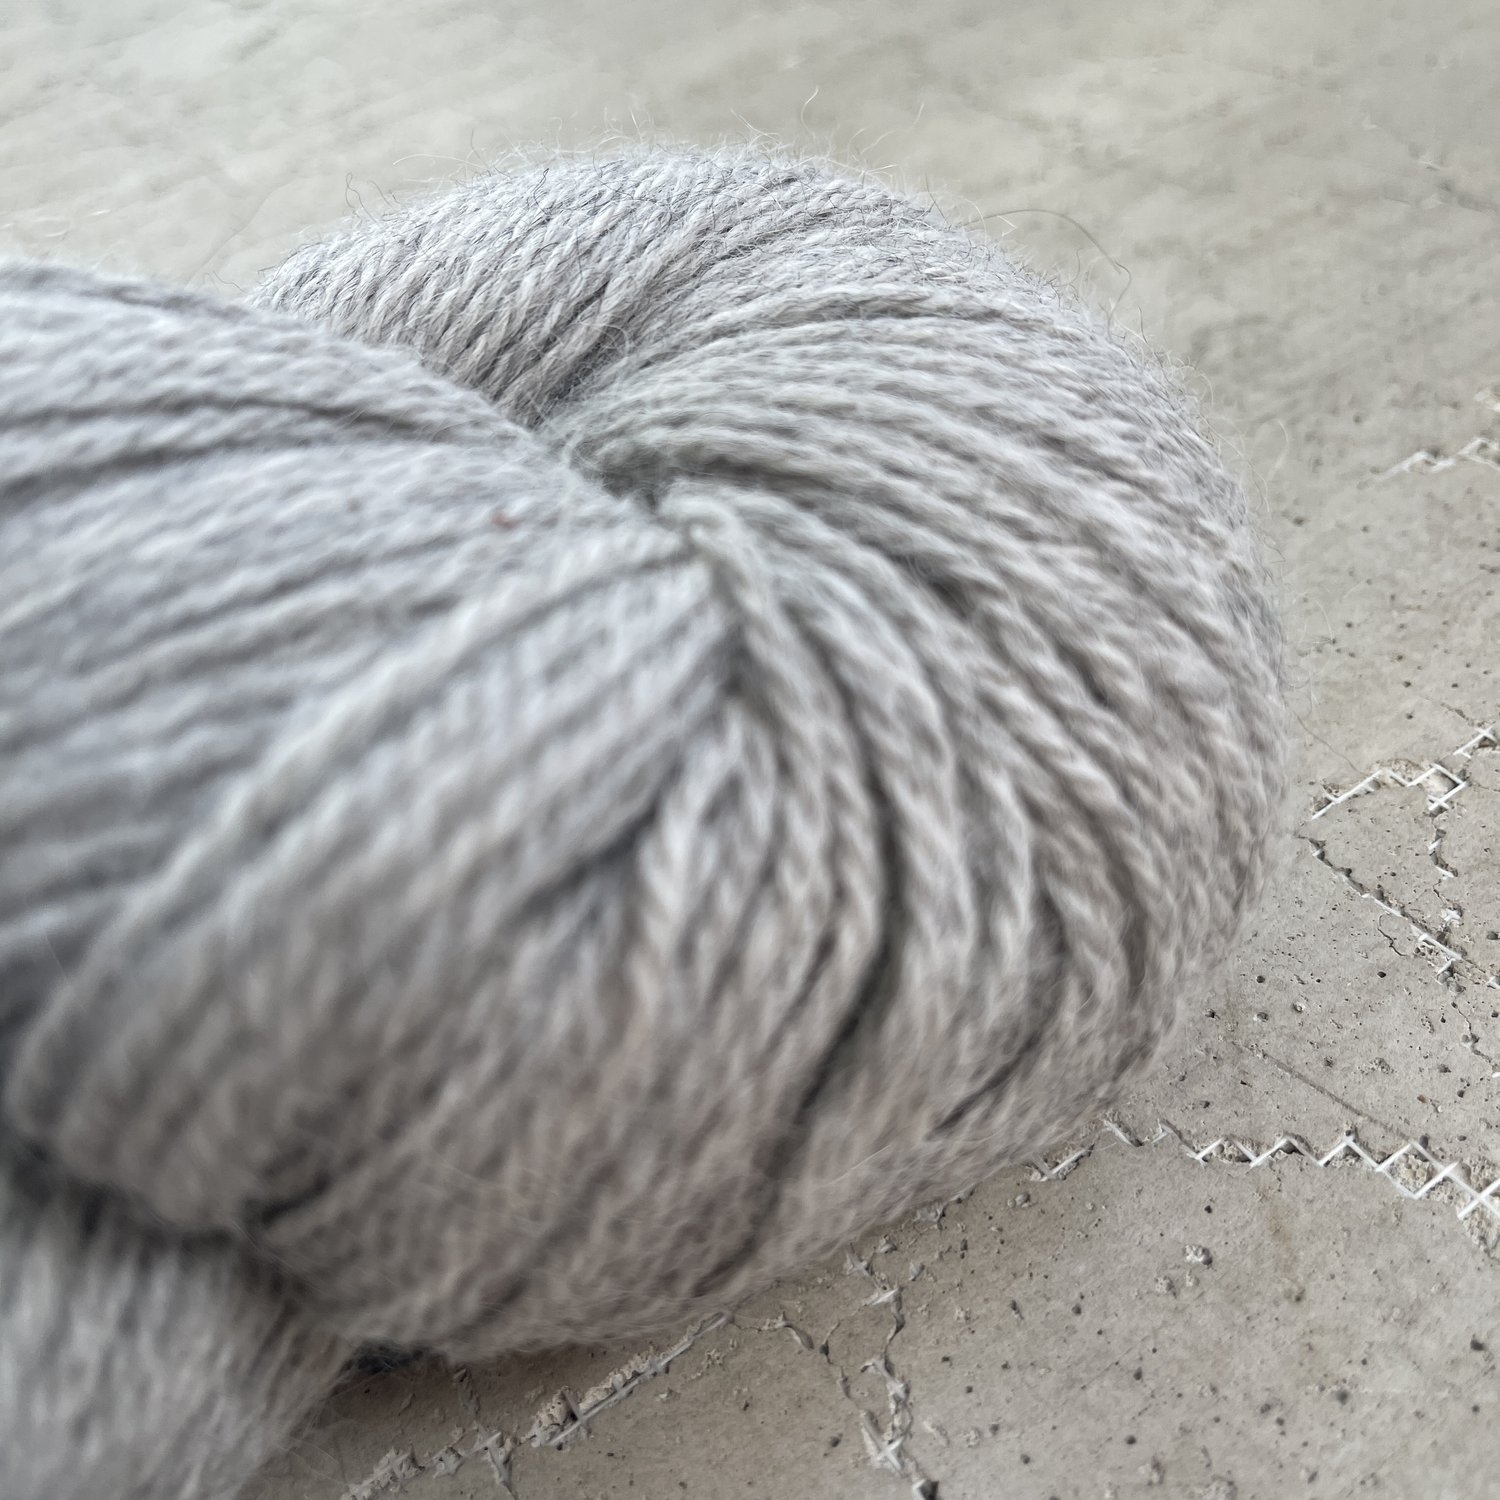 Bulky Alpaca Yarn for Knitting and Other Projects - Alpacas of Montana